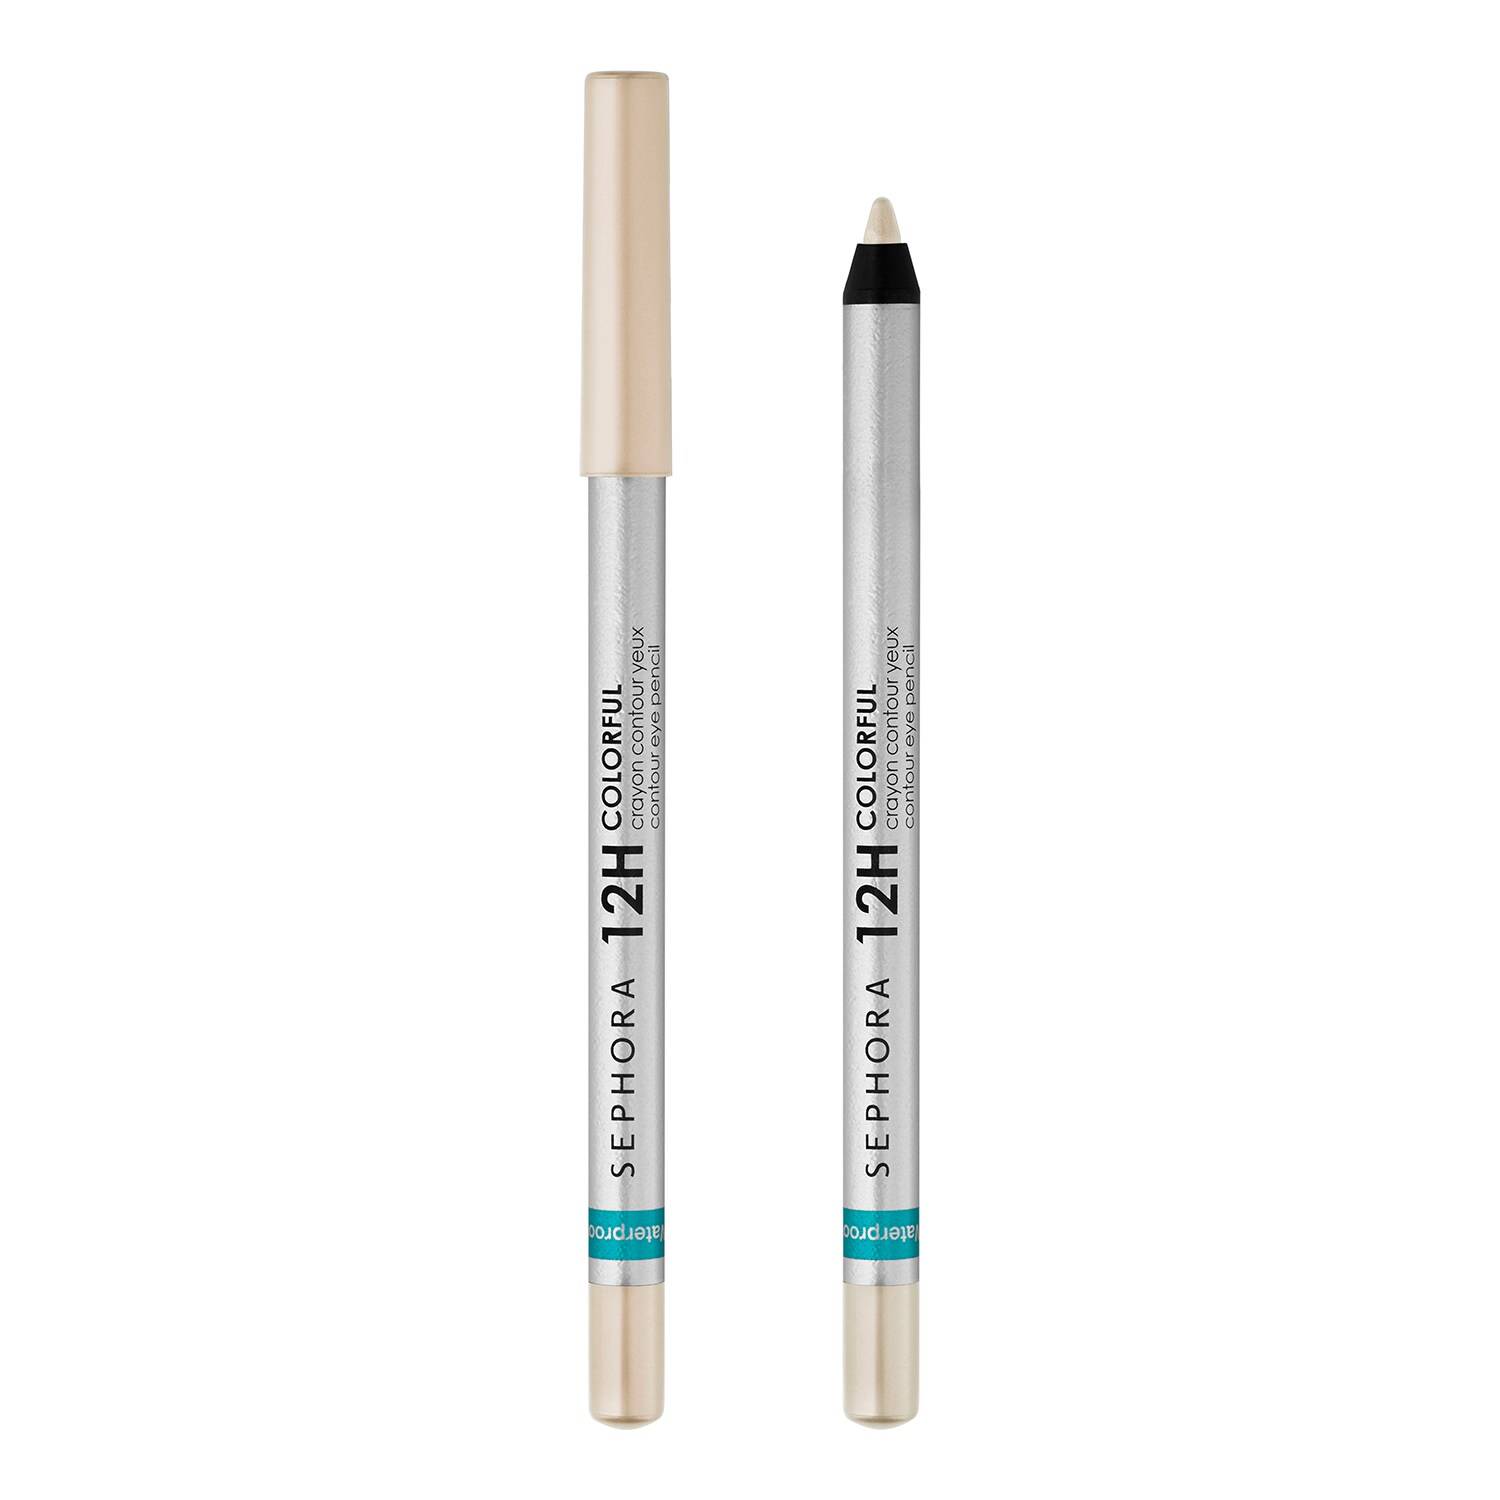 Sephora Collection 12H Coloful Contour Eye Pencil 1G 06 Blonde Ambition - Shimmer